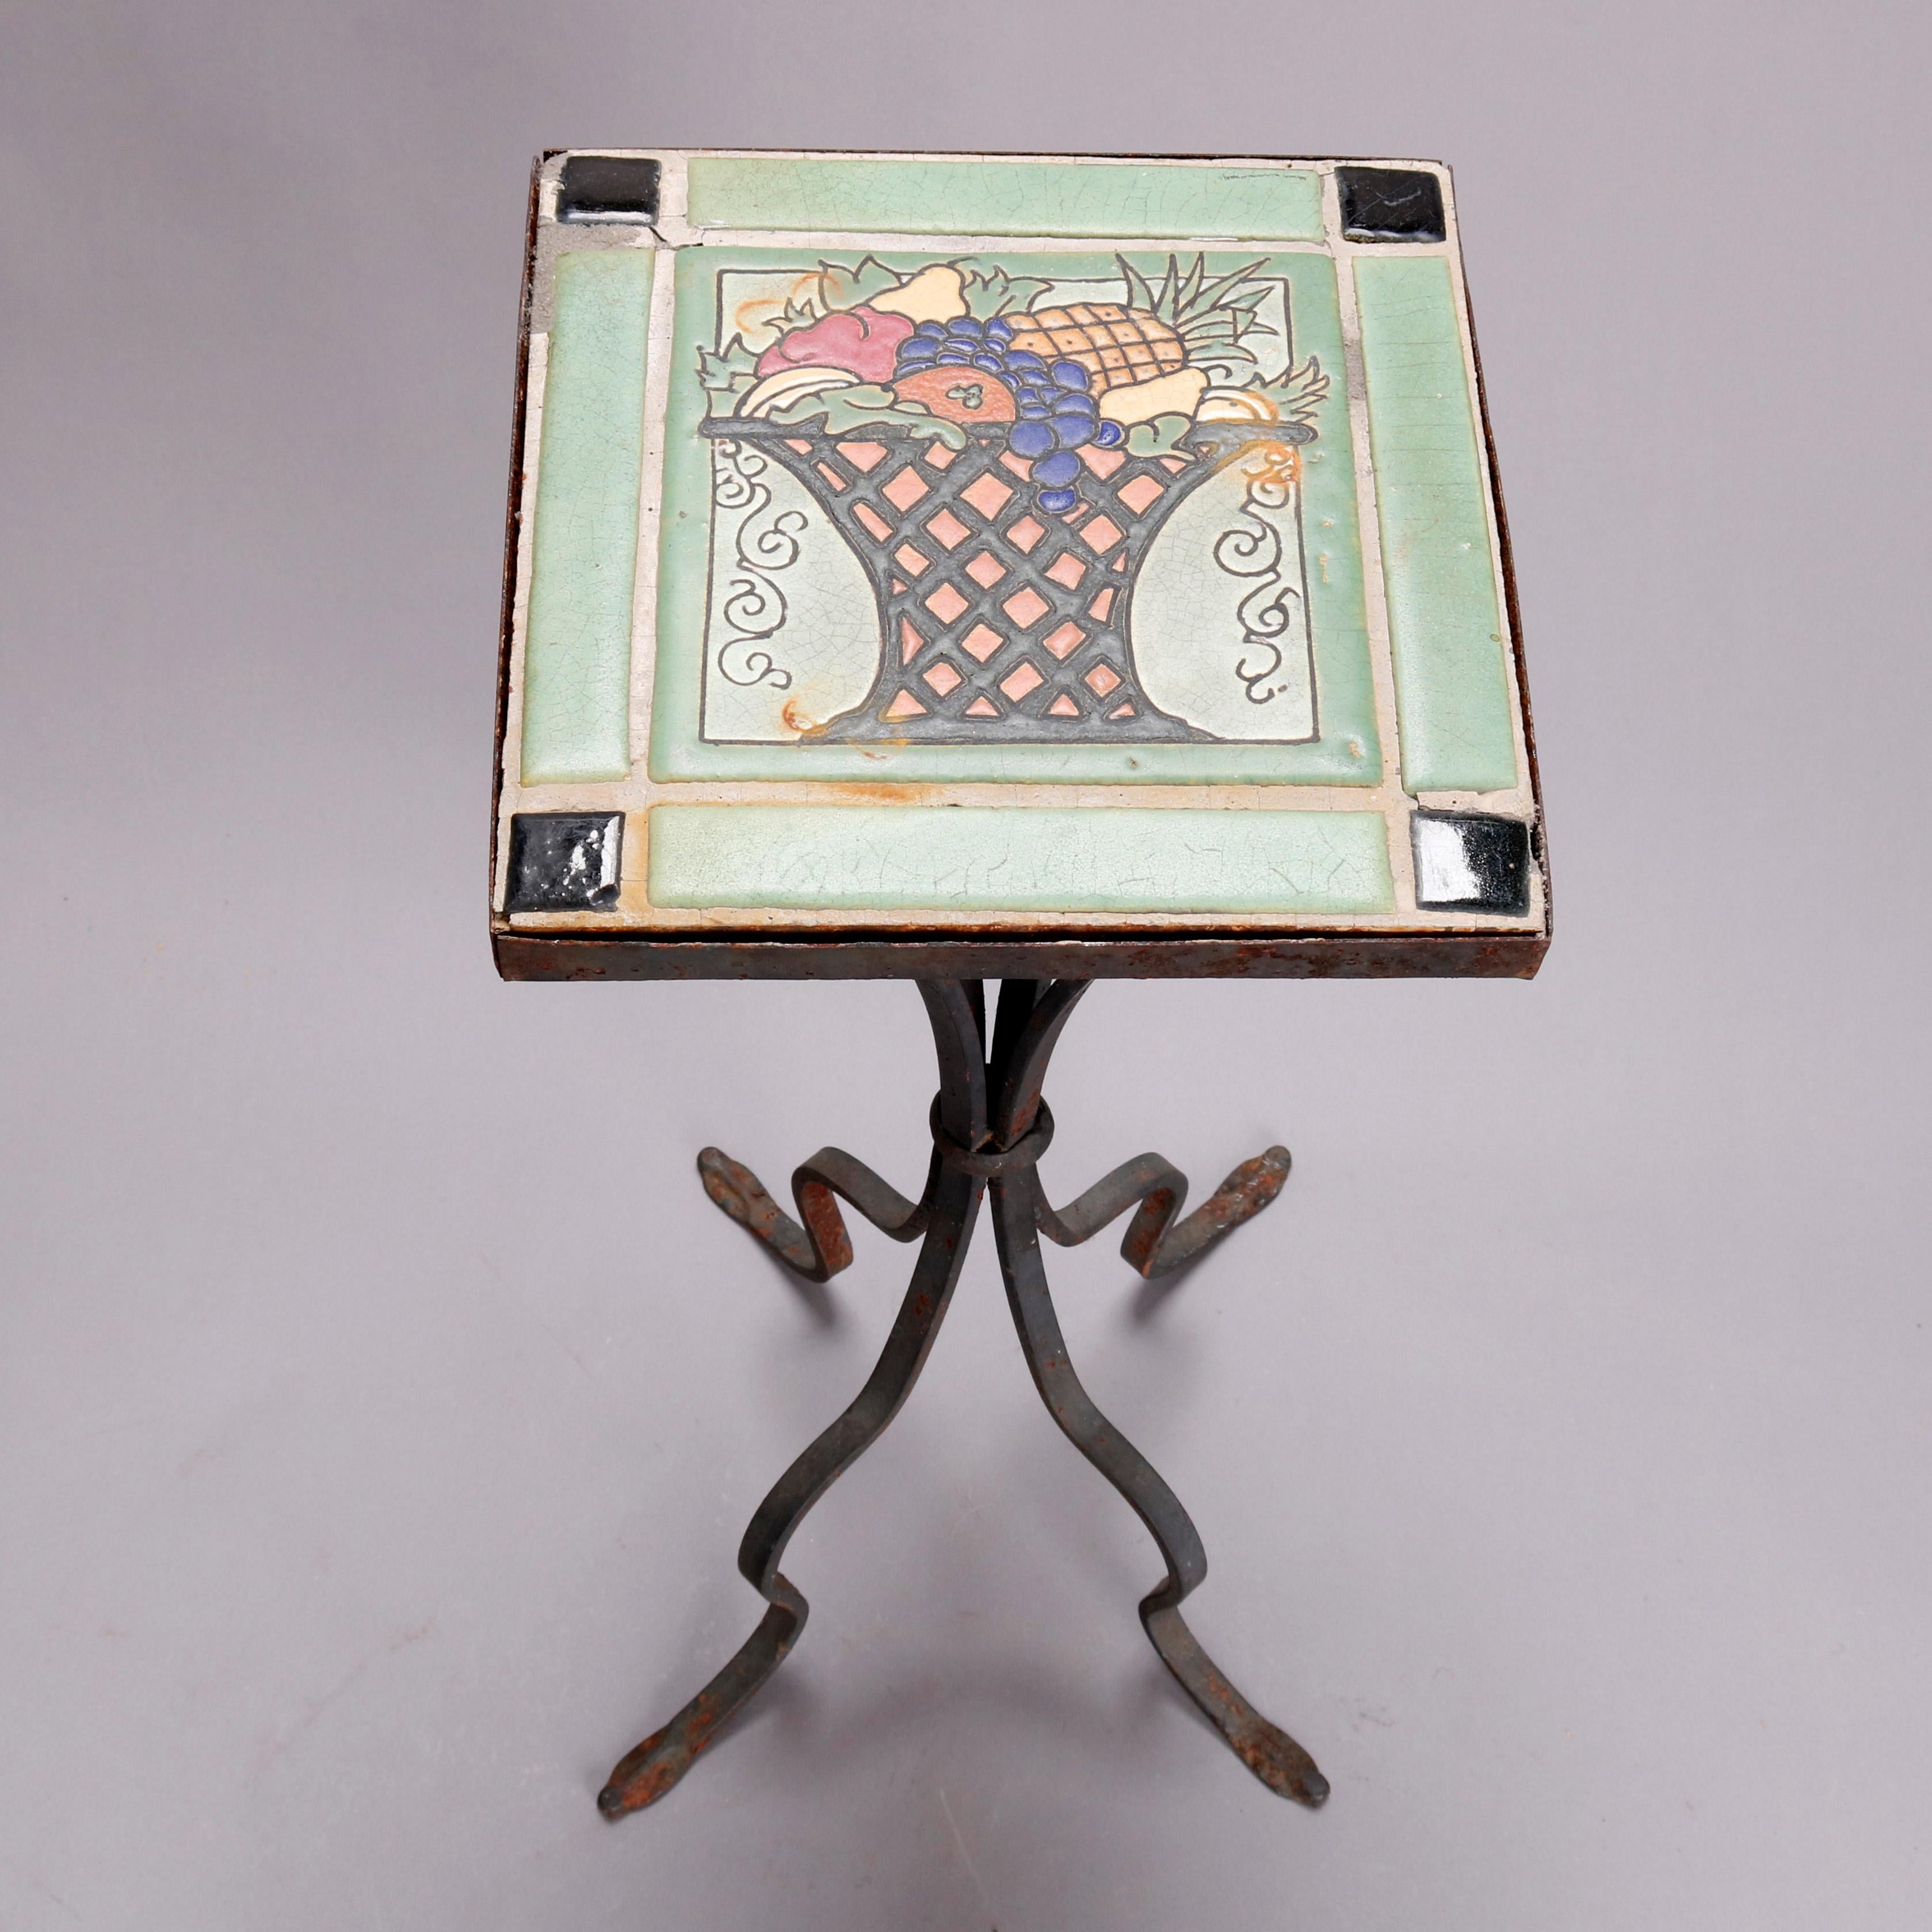 A vintage Arts & Crafts Yellin School tile top side stand offers enameled ceramic tile with panier de fleurs within frame having ebonized corners and surmounting wrought iron stand with four concave legs with central band and terminating in cabriole